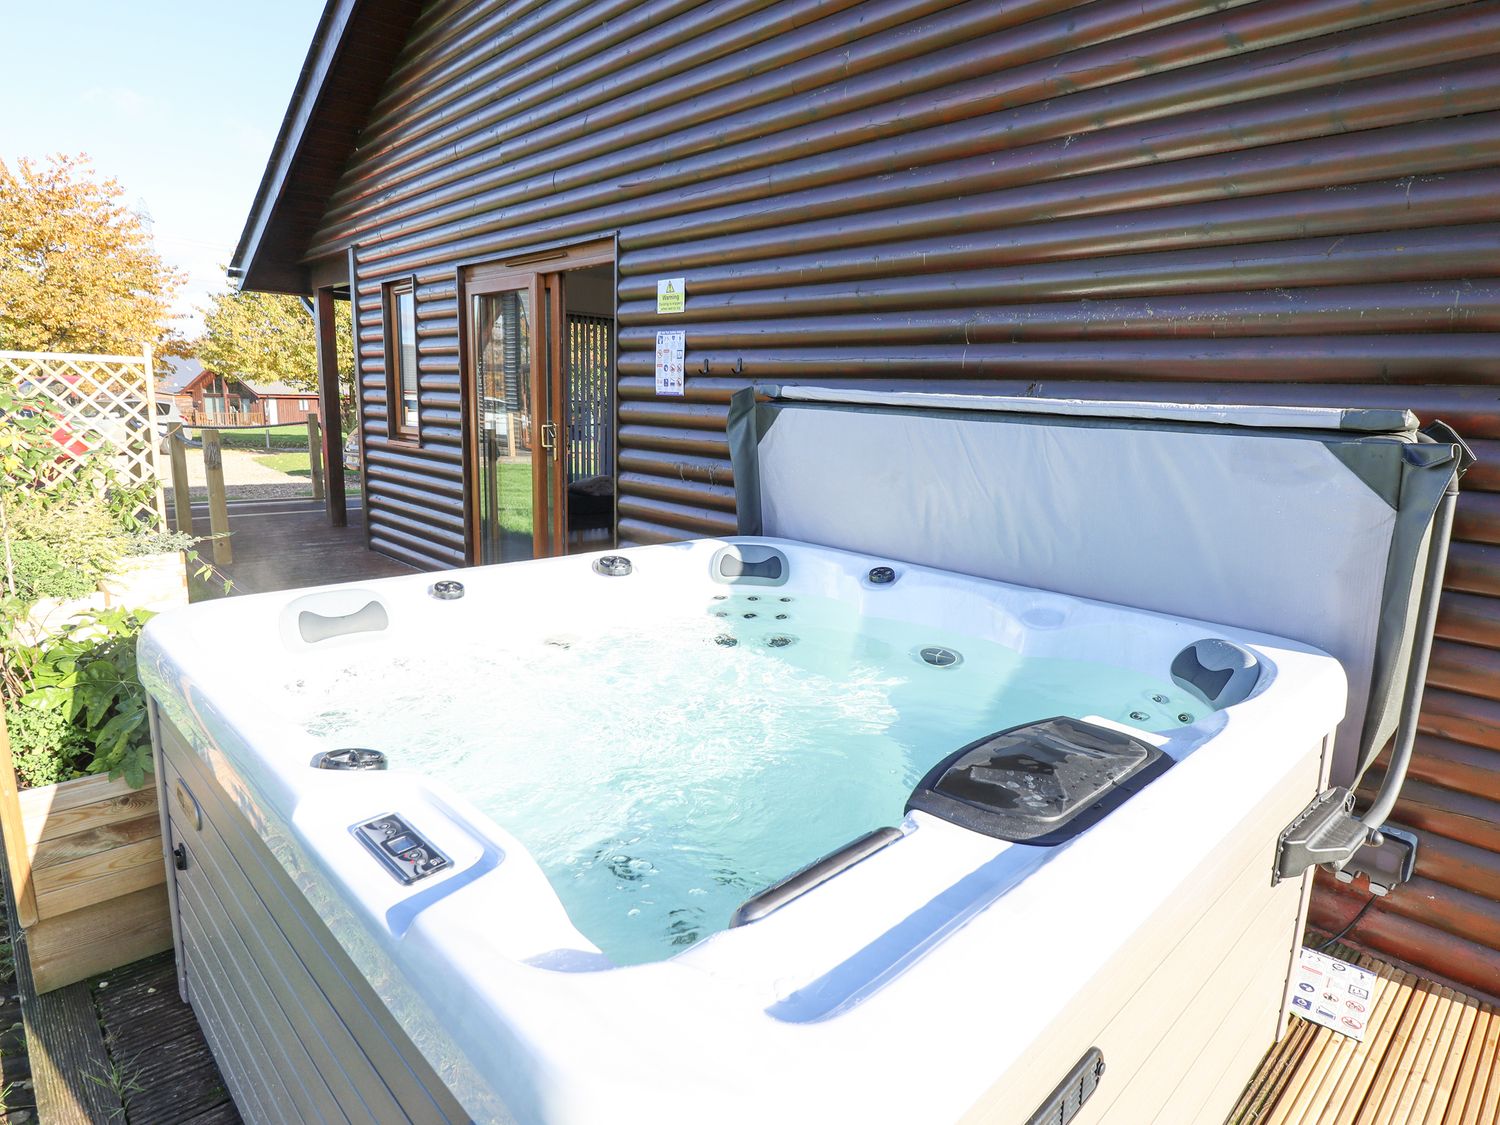 Lodge 2, is nr South Hykeham, Lincolnshire. Pet-friendly lodge with hot tub. Near amenities. Family.